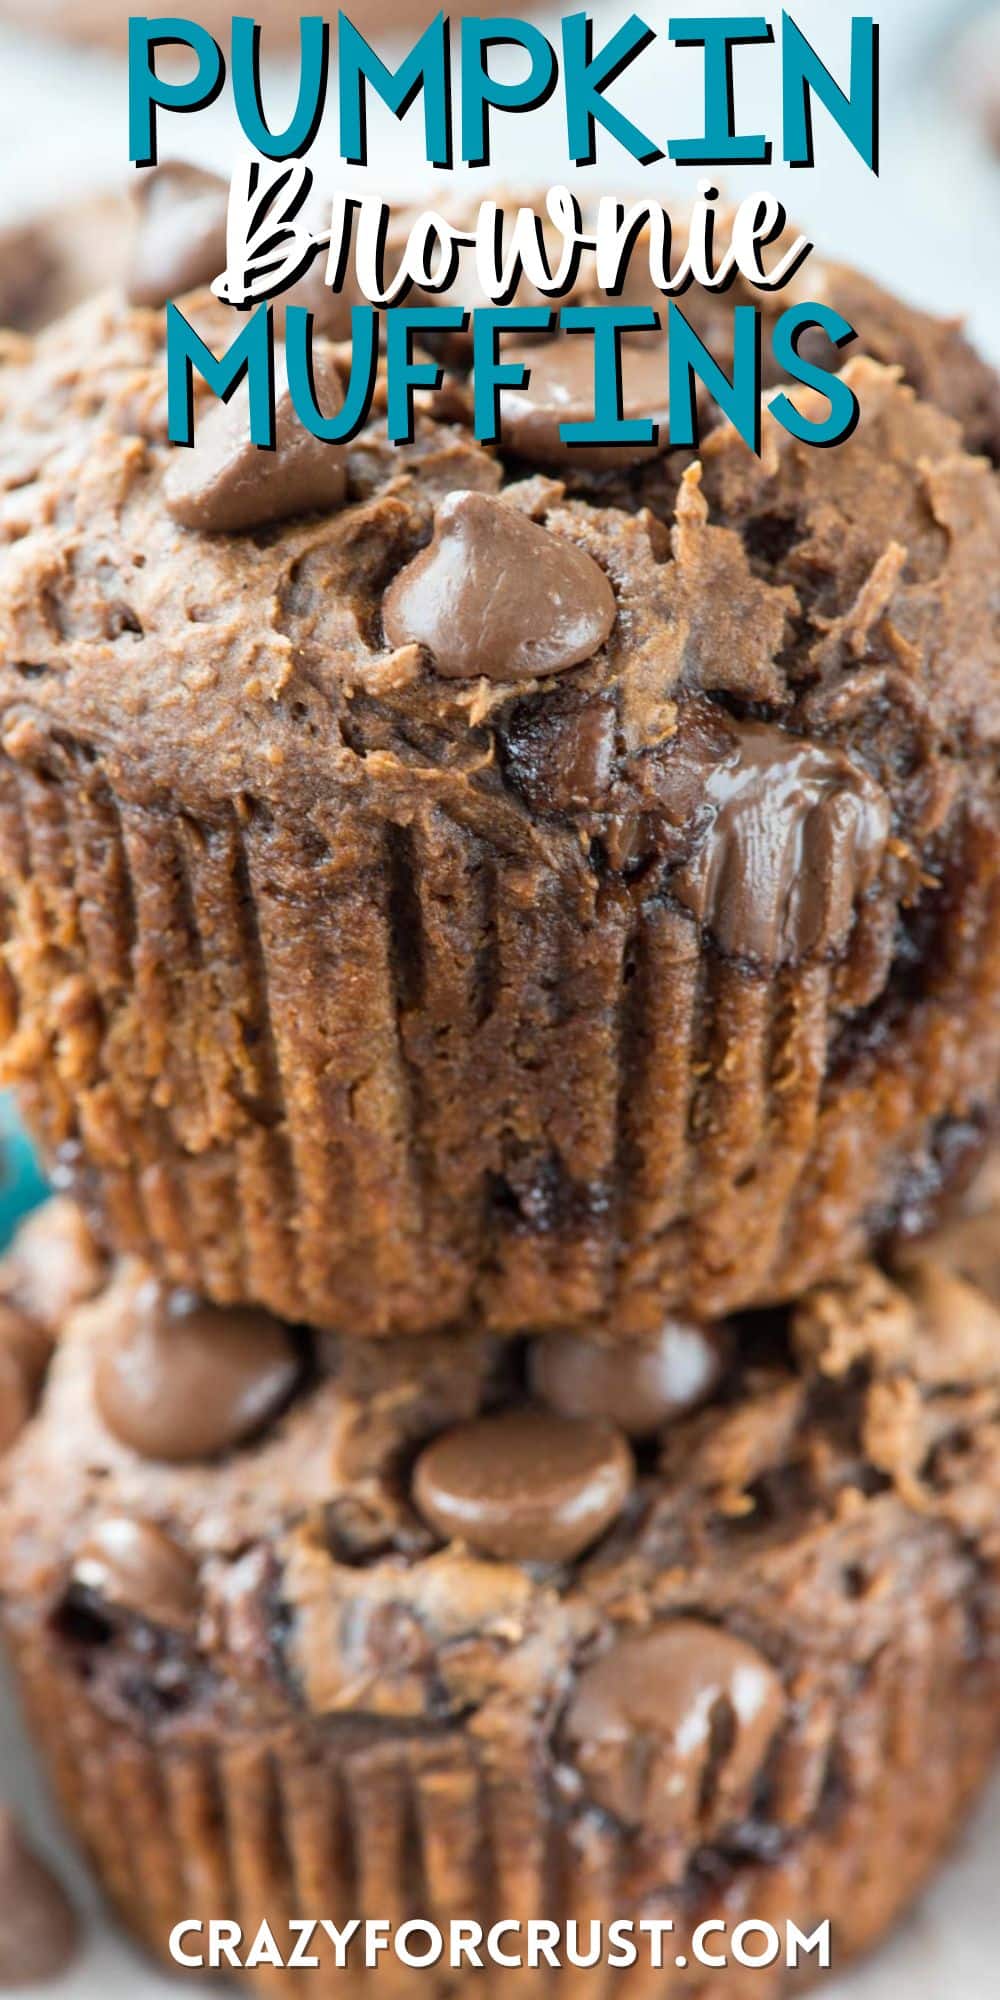 stacked chocolate muffins with chocolate chips baked in with words in the image.